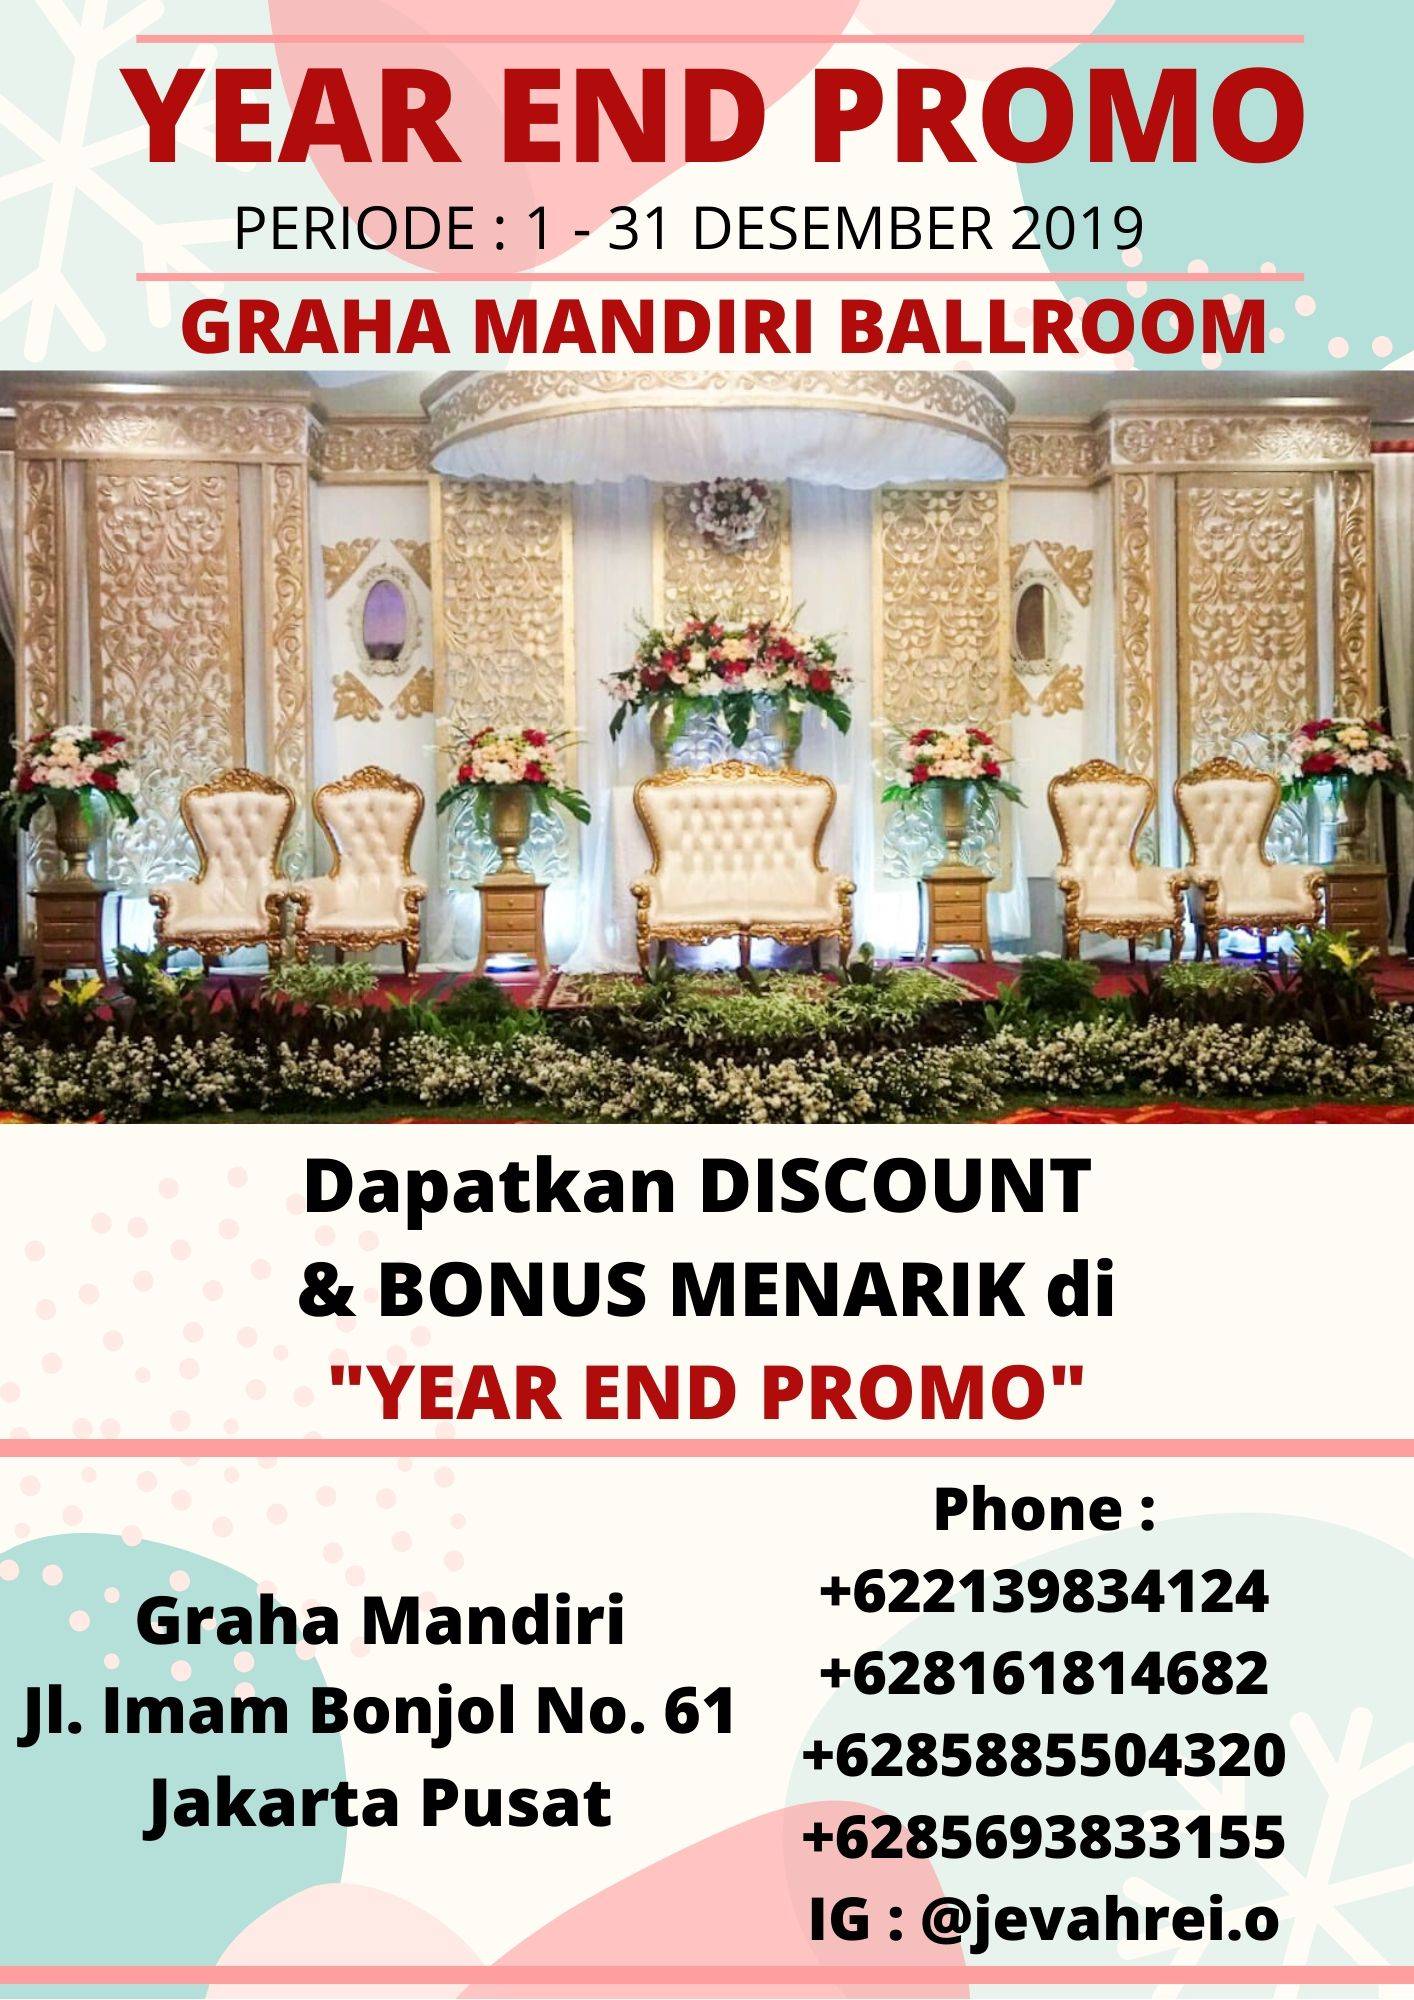 YEAR END PROMO